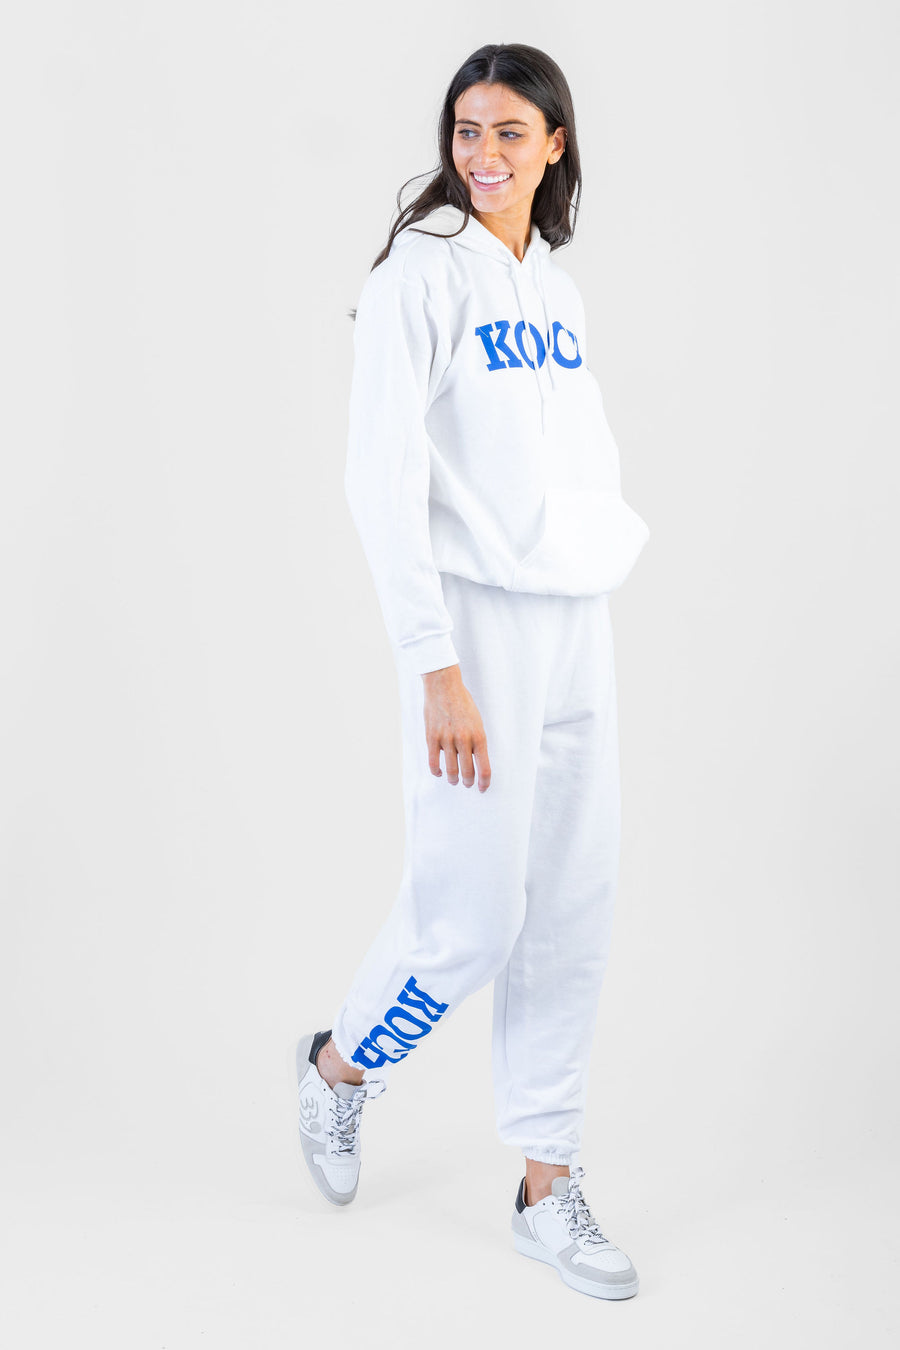 KOCH Classic Sweatsuit *Limited*Edition*